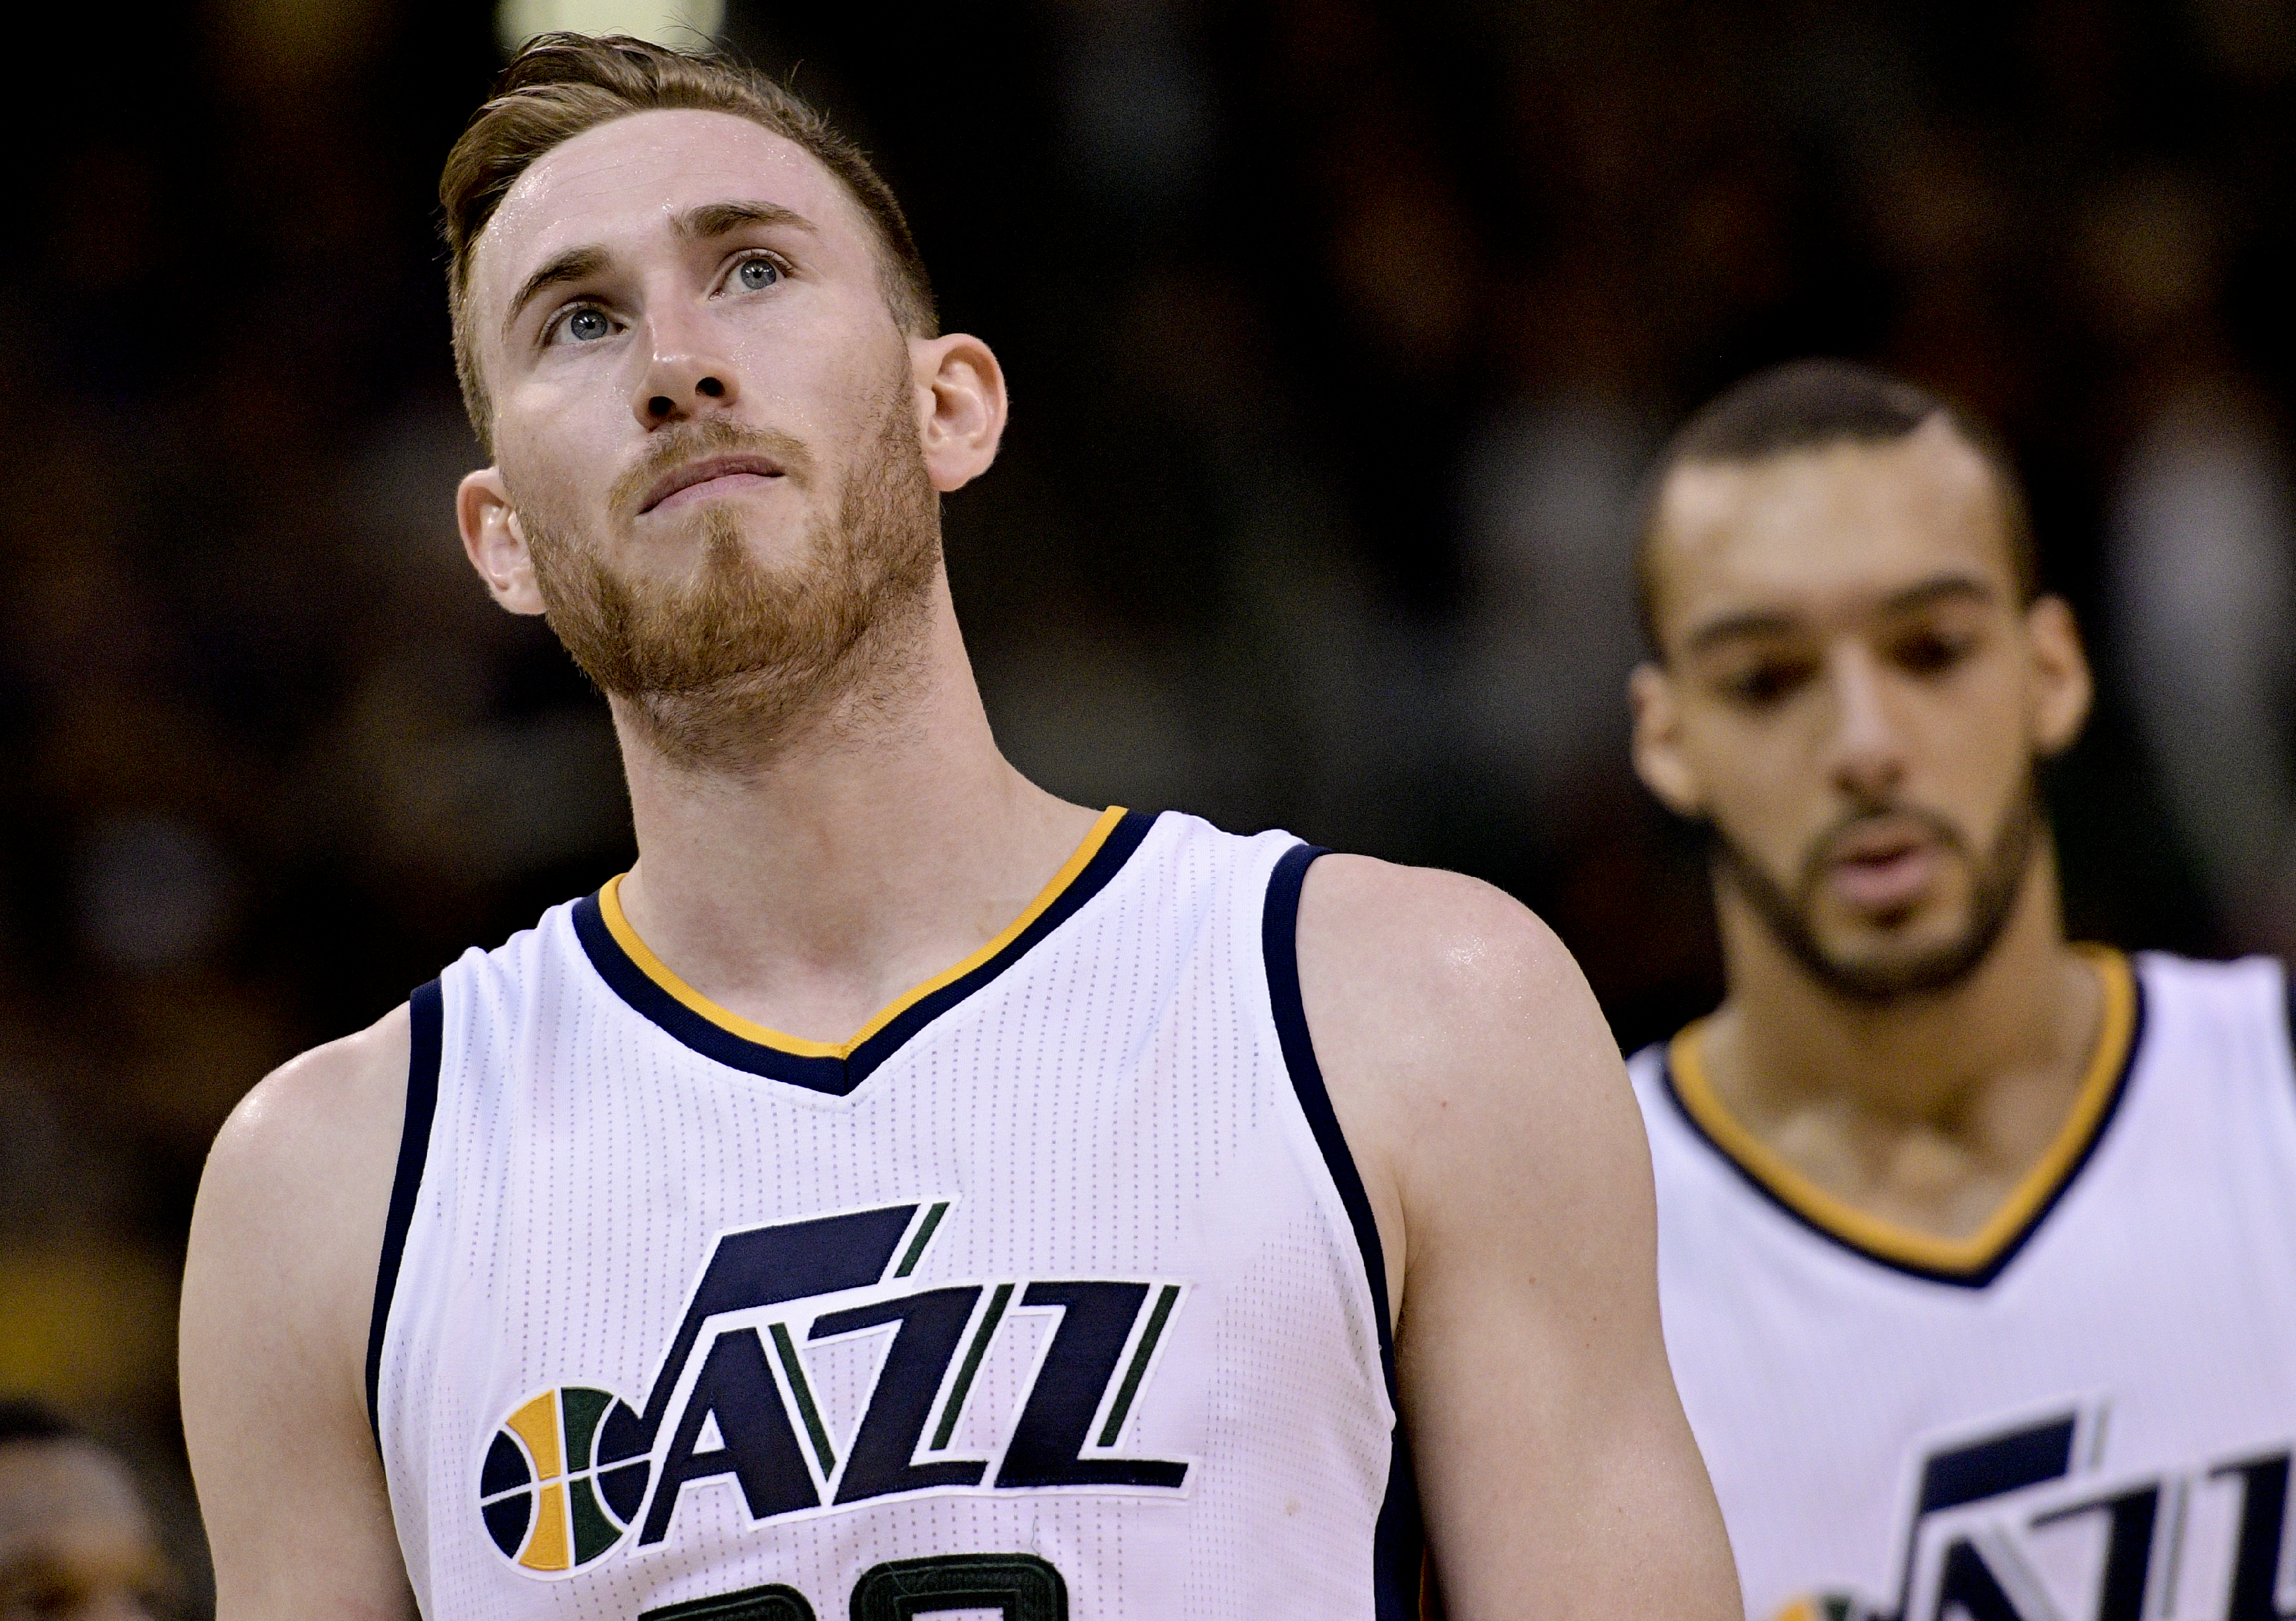 Gordon Hayward opens up a bit more about decision to leave the